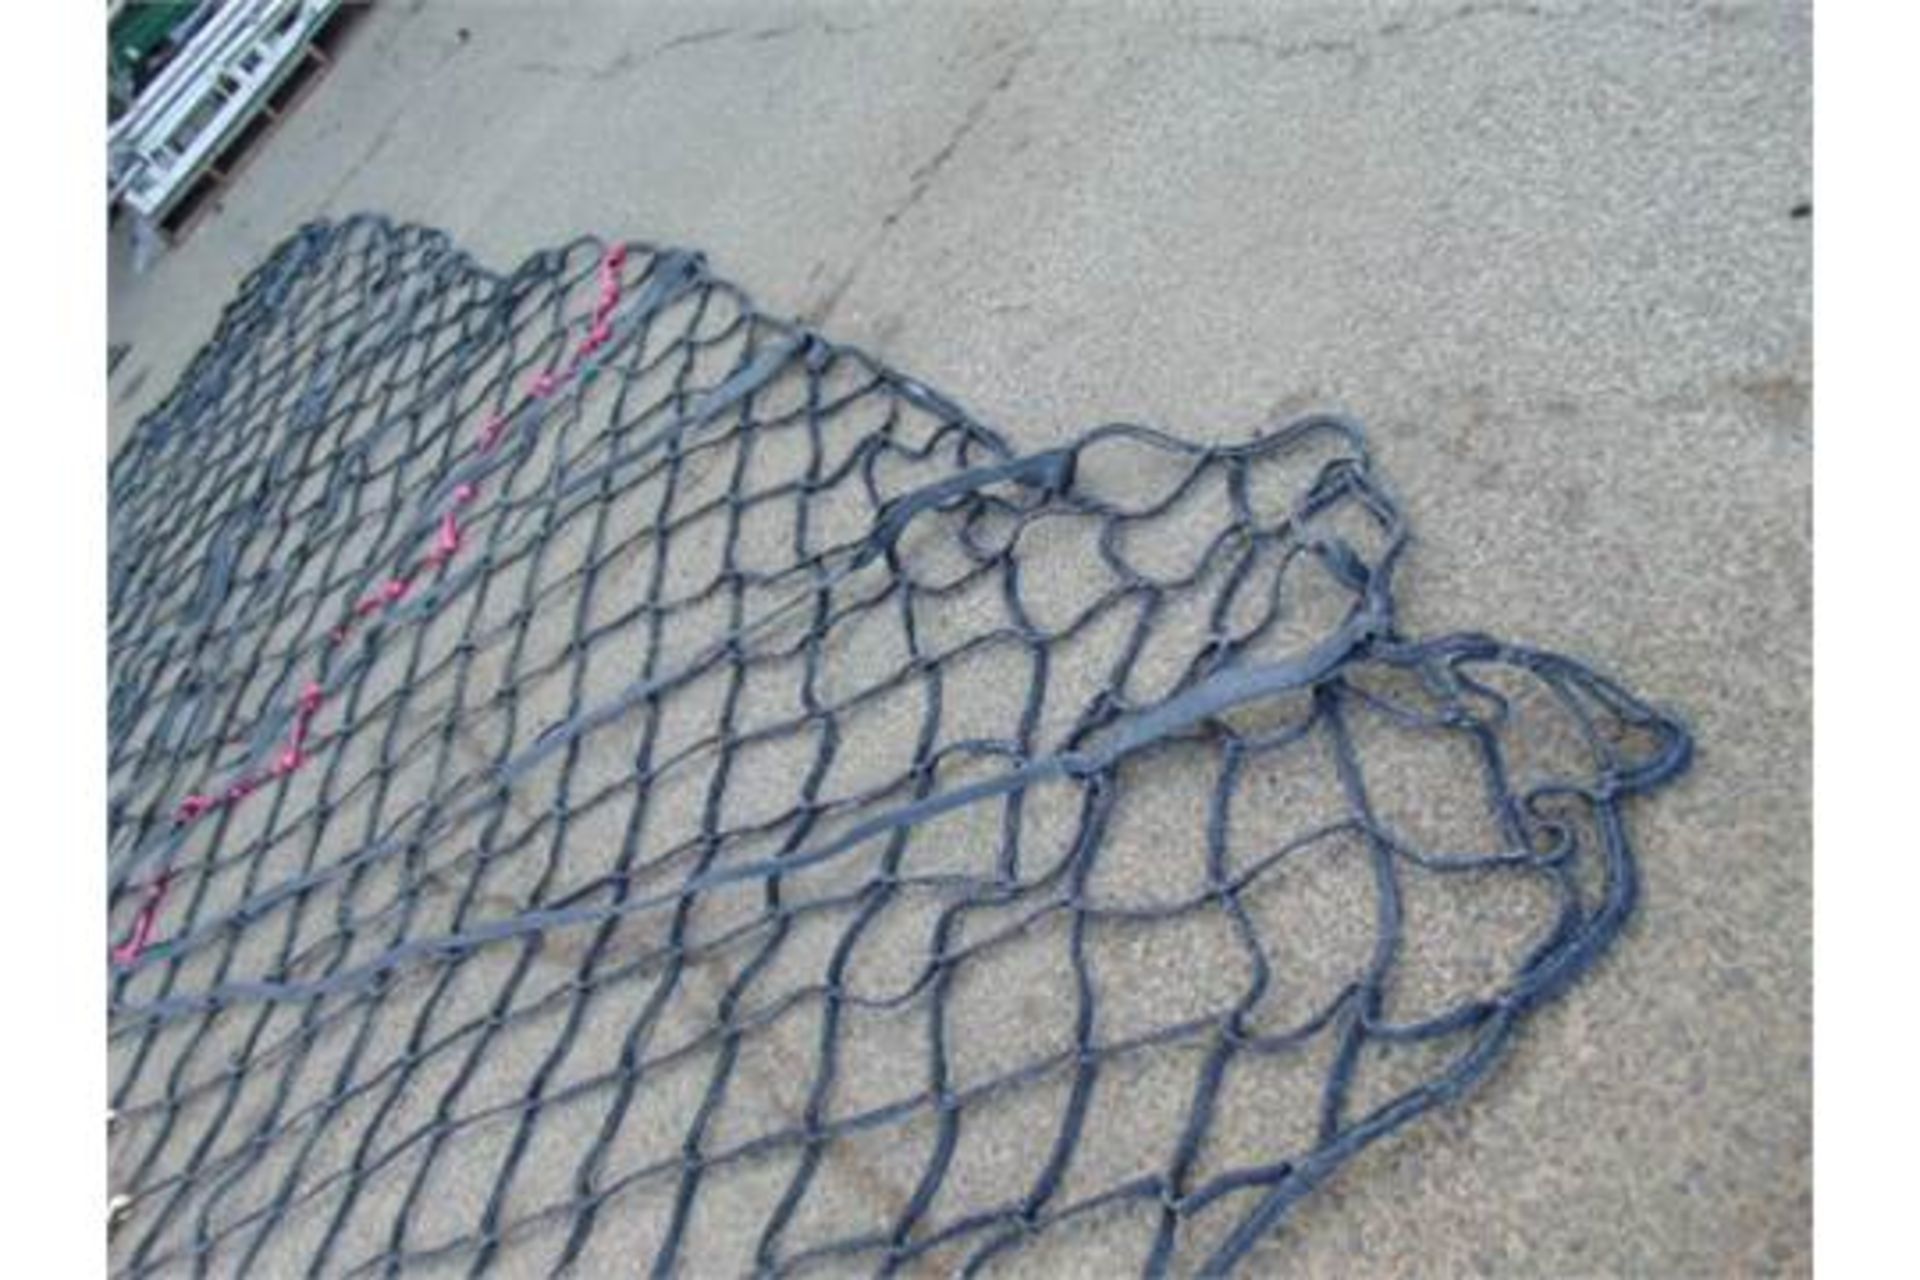 5600Kg Helicopter Cargo Net - Image 7 of 11